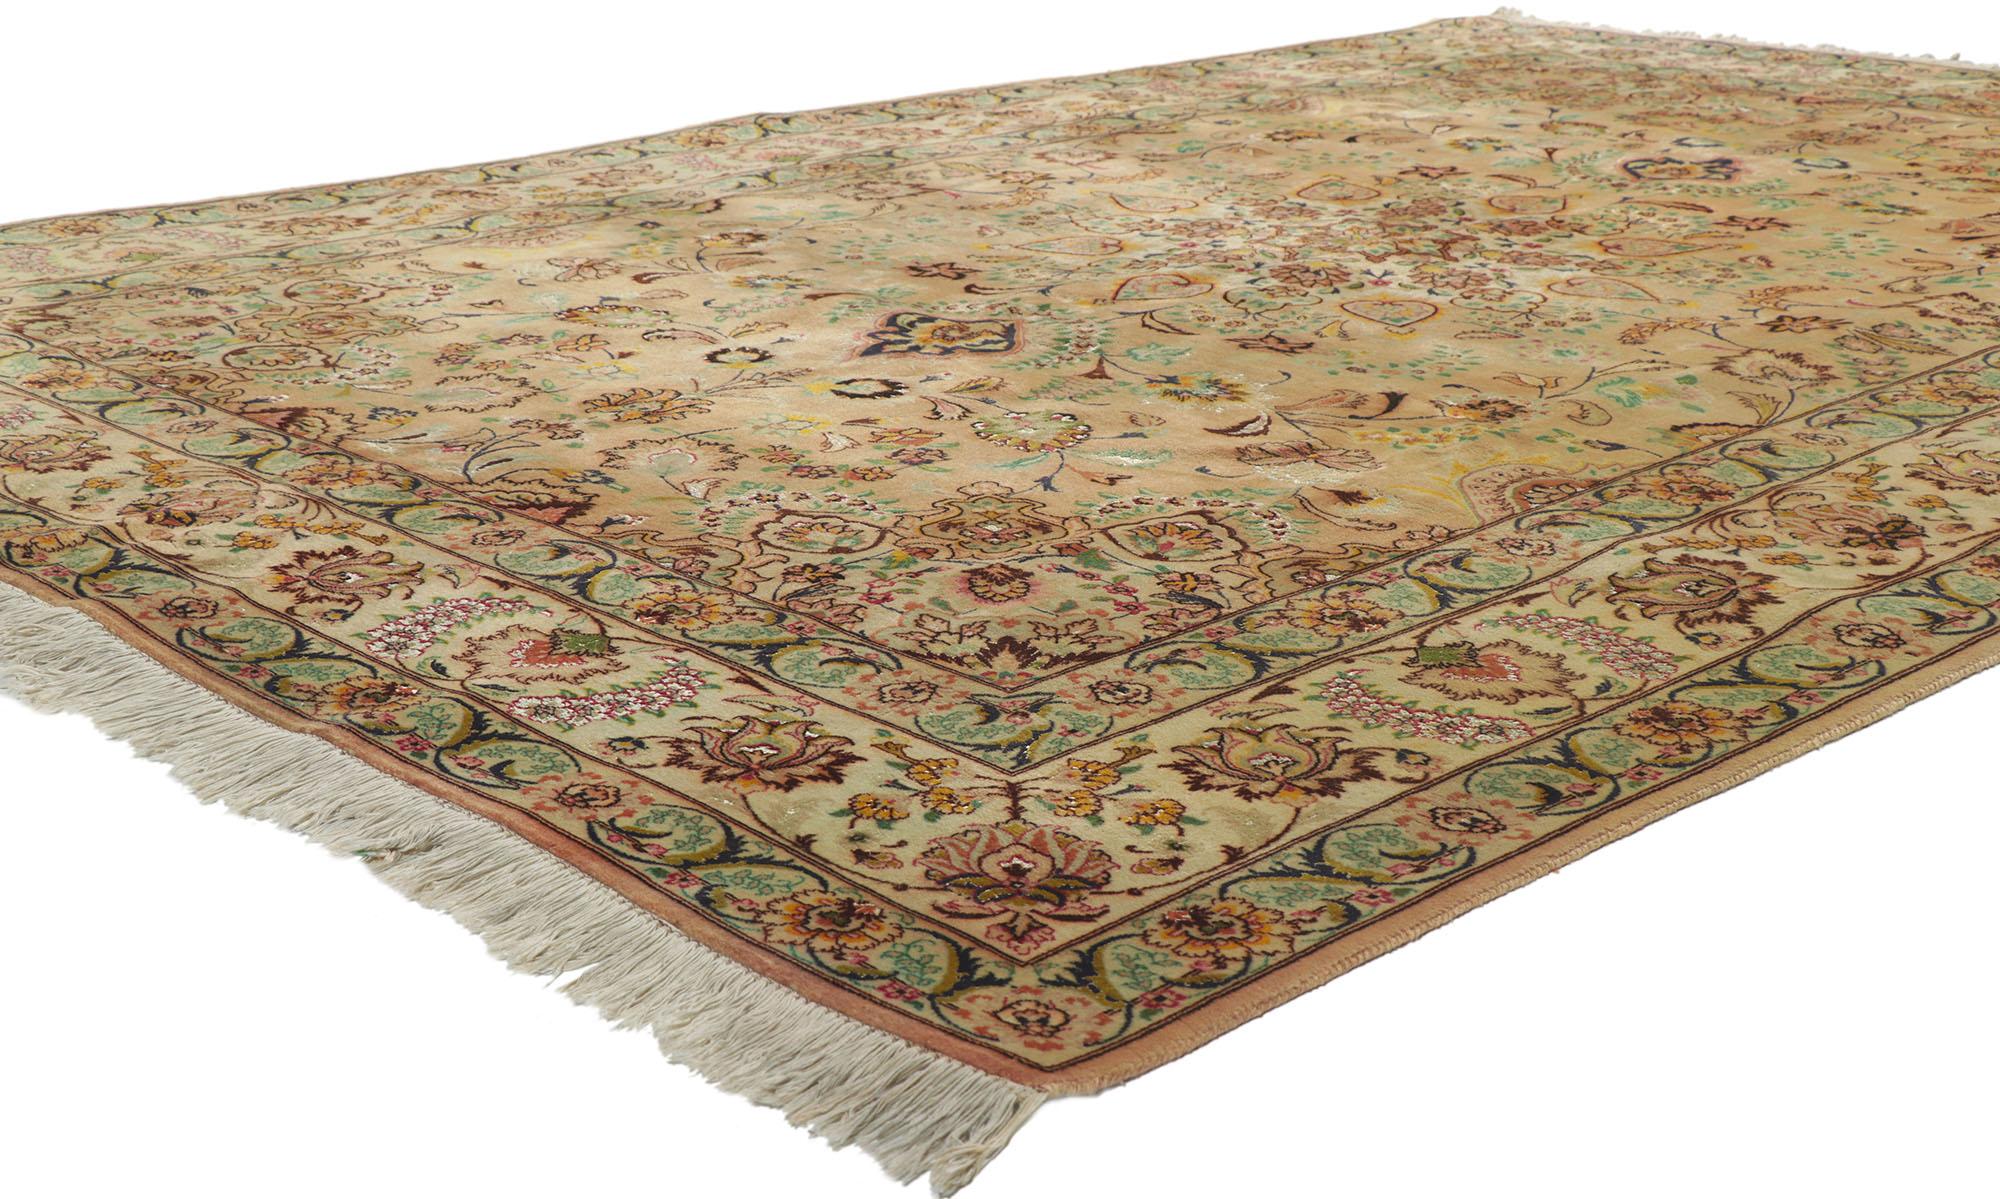 78171 vintage Persian Tabriz wool and silk rug, 06'08 x 09'10. Rendered in variegated shades of ochre, ecru, sandstone, cider, green, rust, beige, sage, light green, rose, gold, navy blue, rosewood, olive, brown, and maroon with other accent colors.